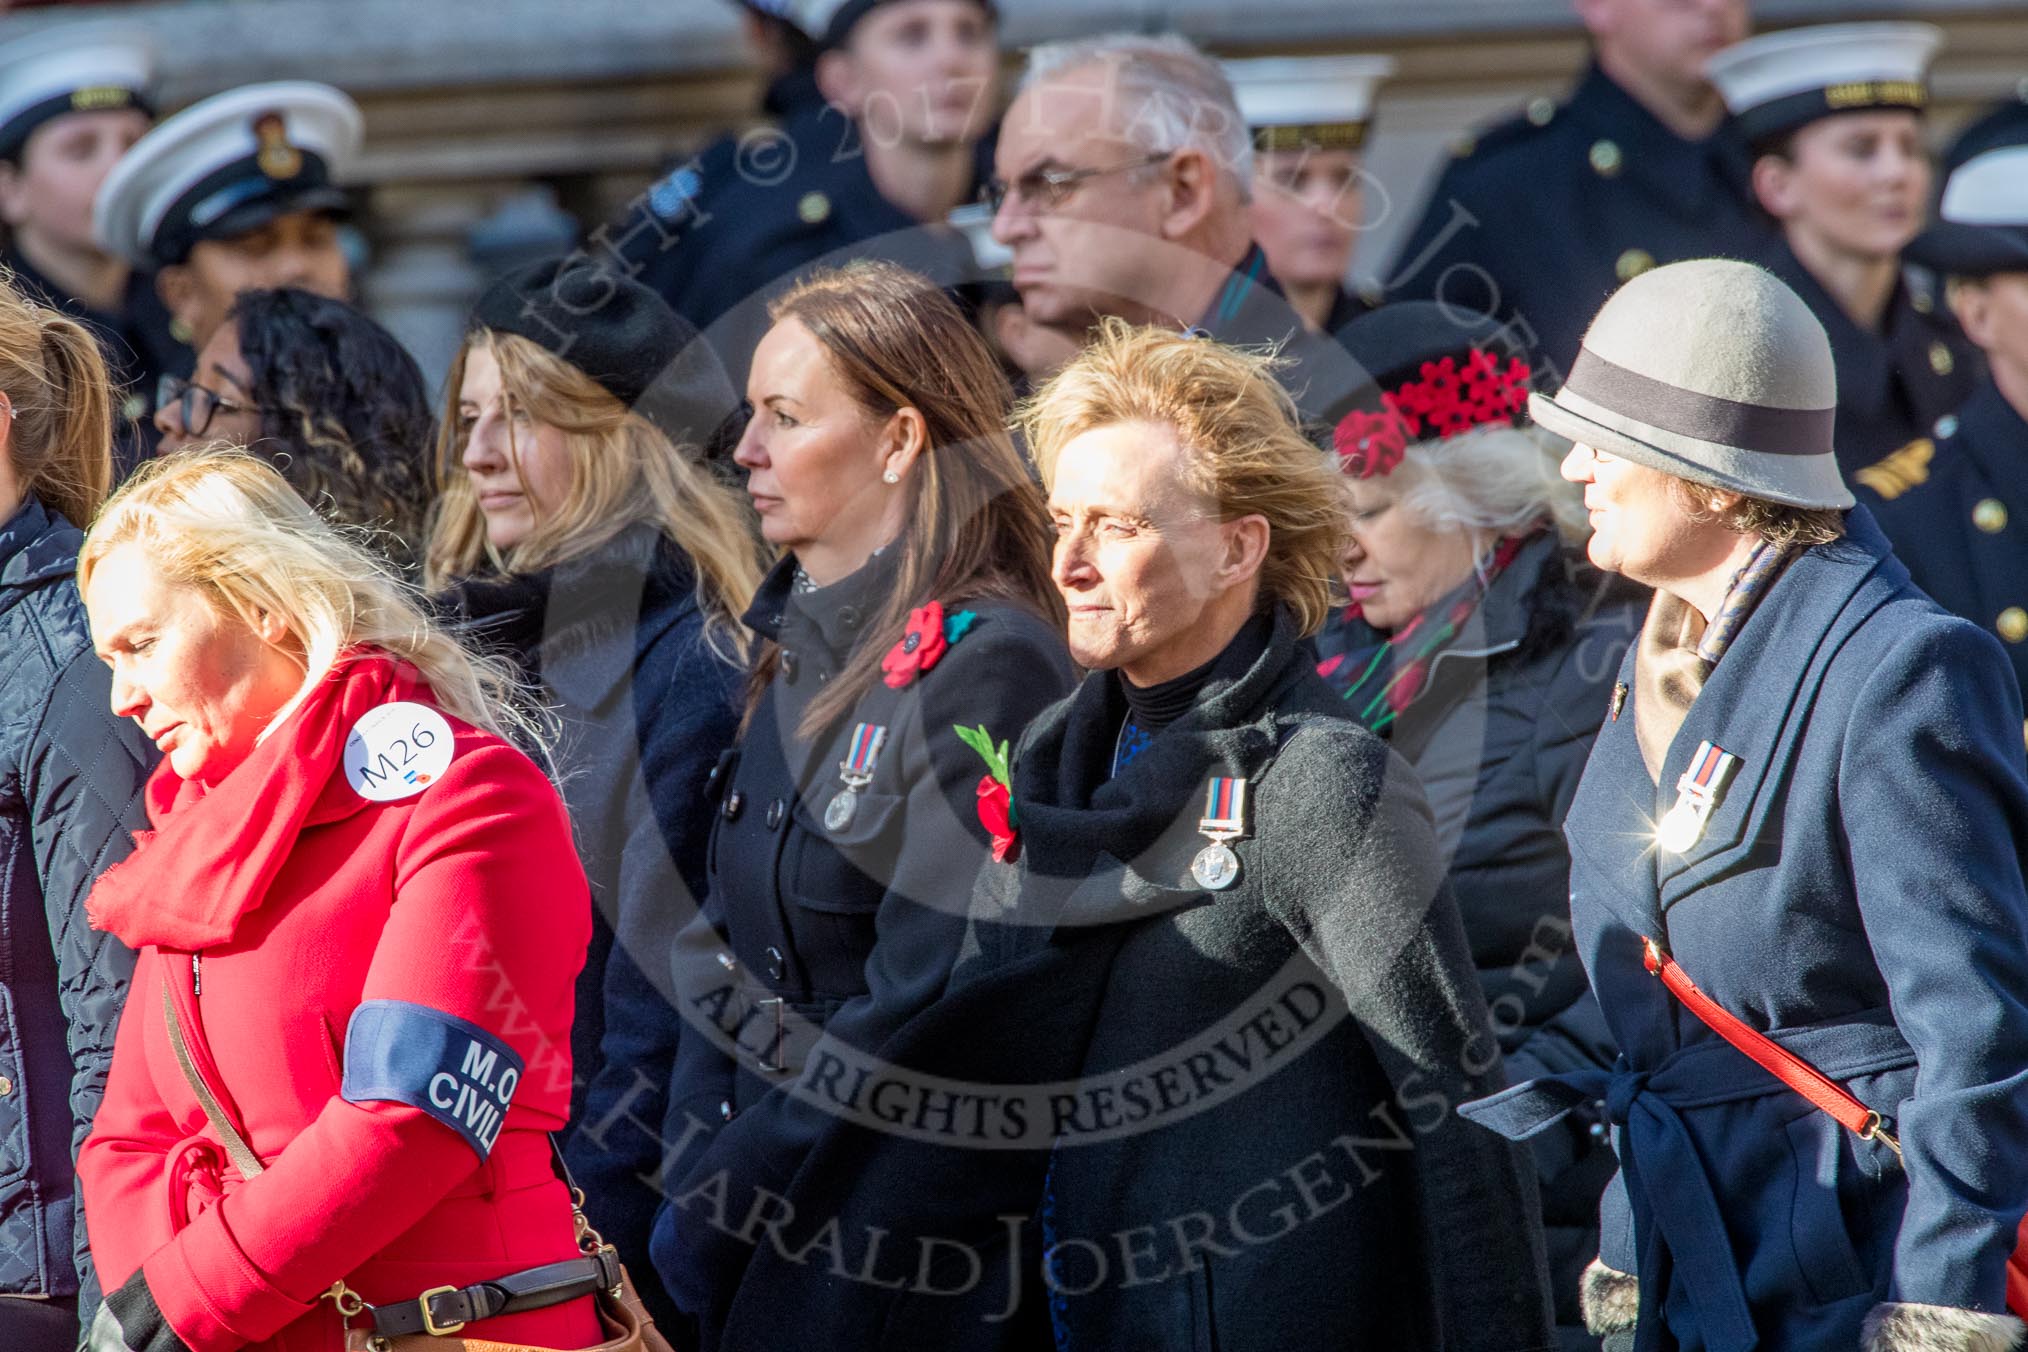 MOD Civilians (Group M26, 17 members) during the Royal British Legion March Past on Remembrance Sunday at the Cenotaph, Whitehall, Westminster, London, 11 November 2018, 12:28.